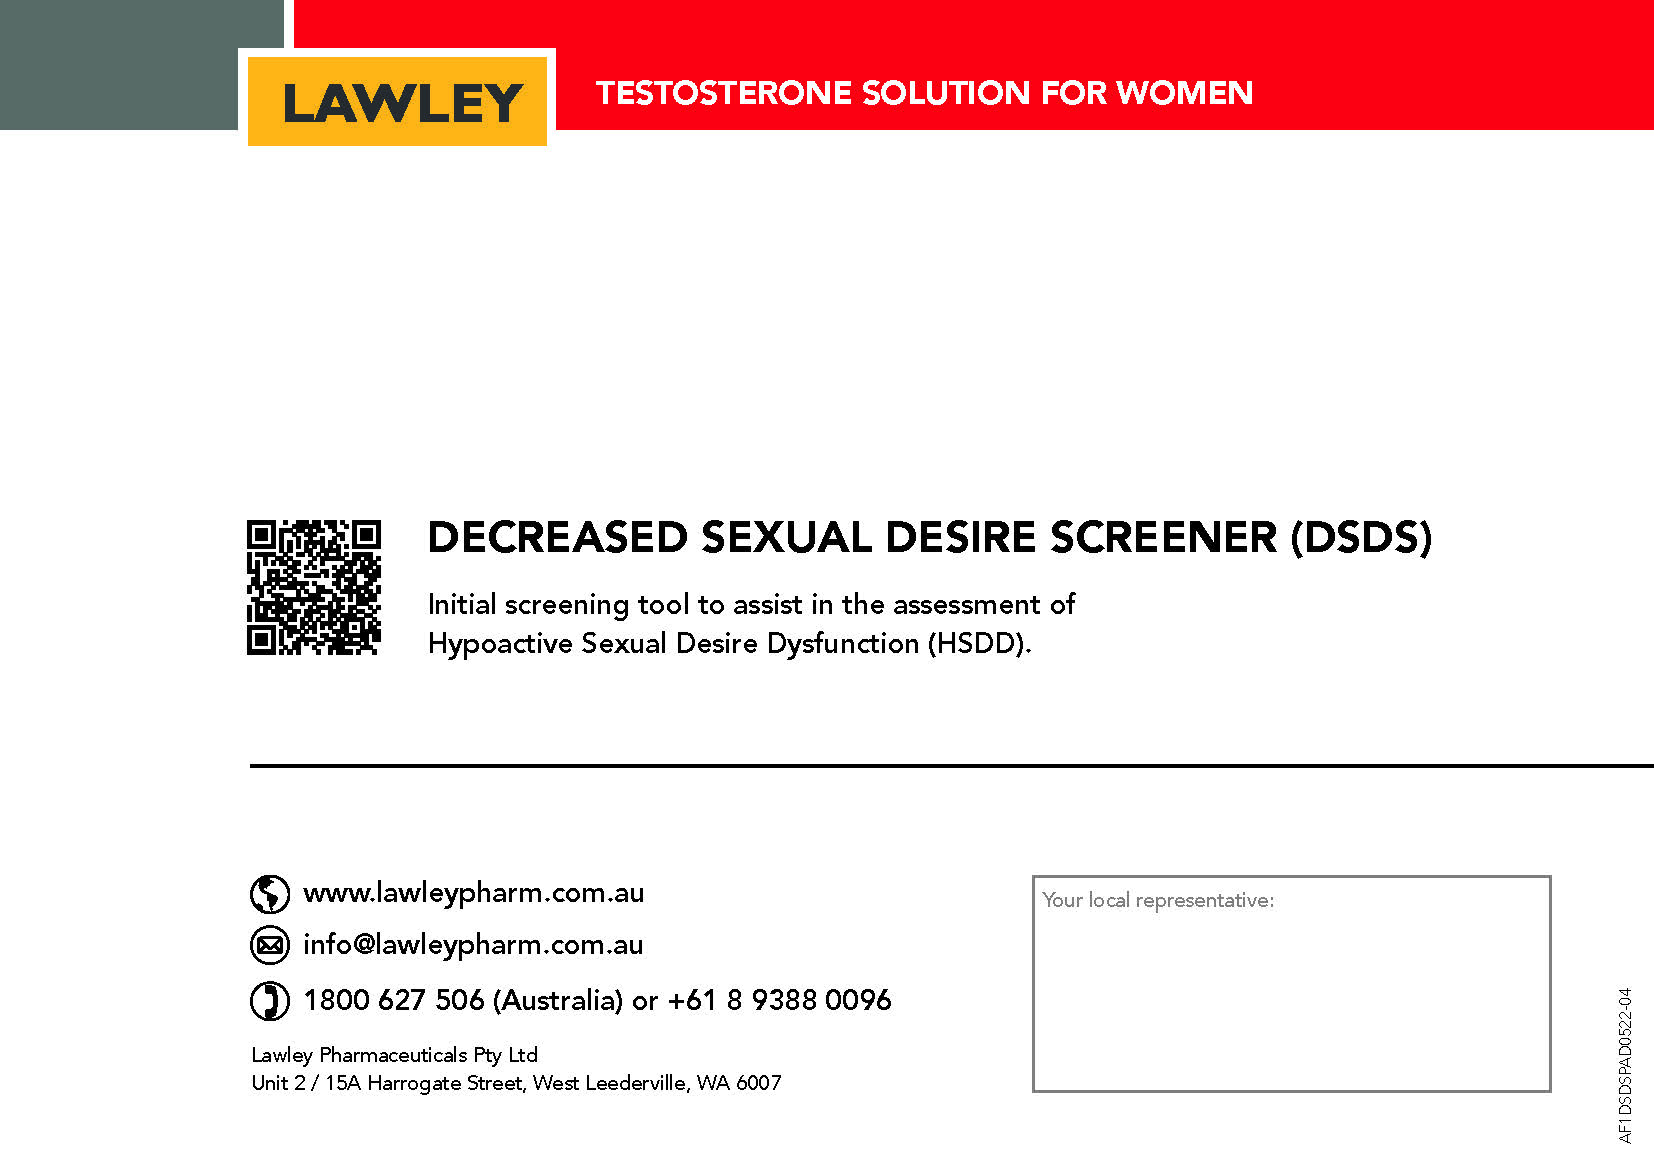 Did you know there is an initial screening tool to assist in the assessment of Hypoactive Sexual Desire Dysfunction (HSDD)?